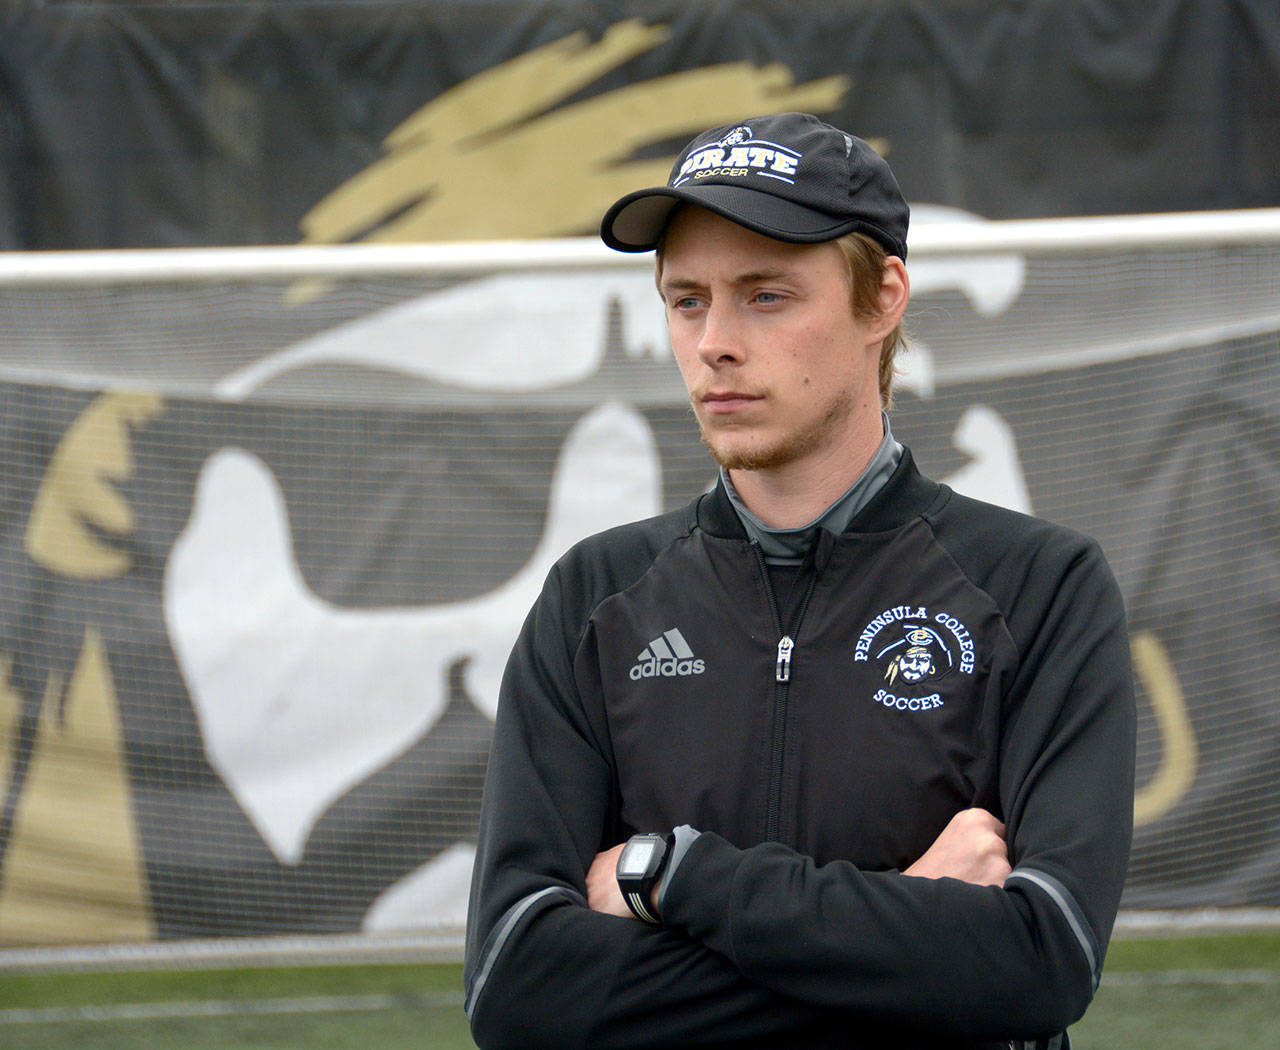 Jake Hughes, a former Peninsula College men’s soccer player and assistant coach, has been selected as the new head coach of the Pirate men’s team.